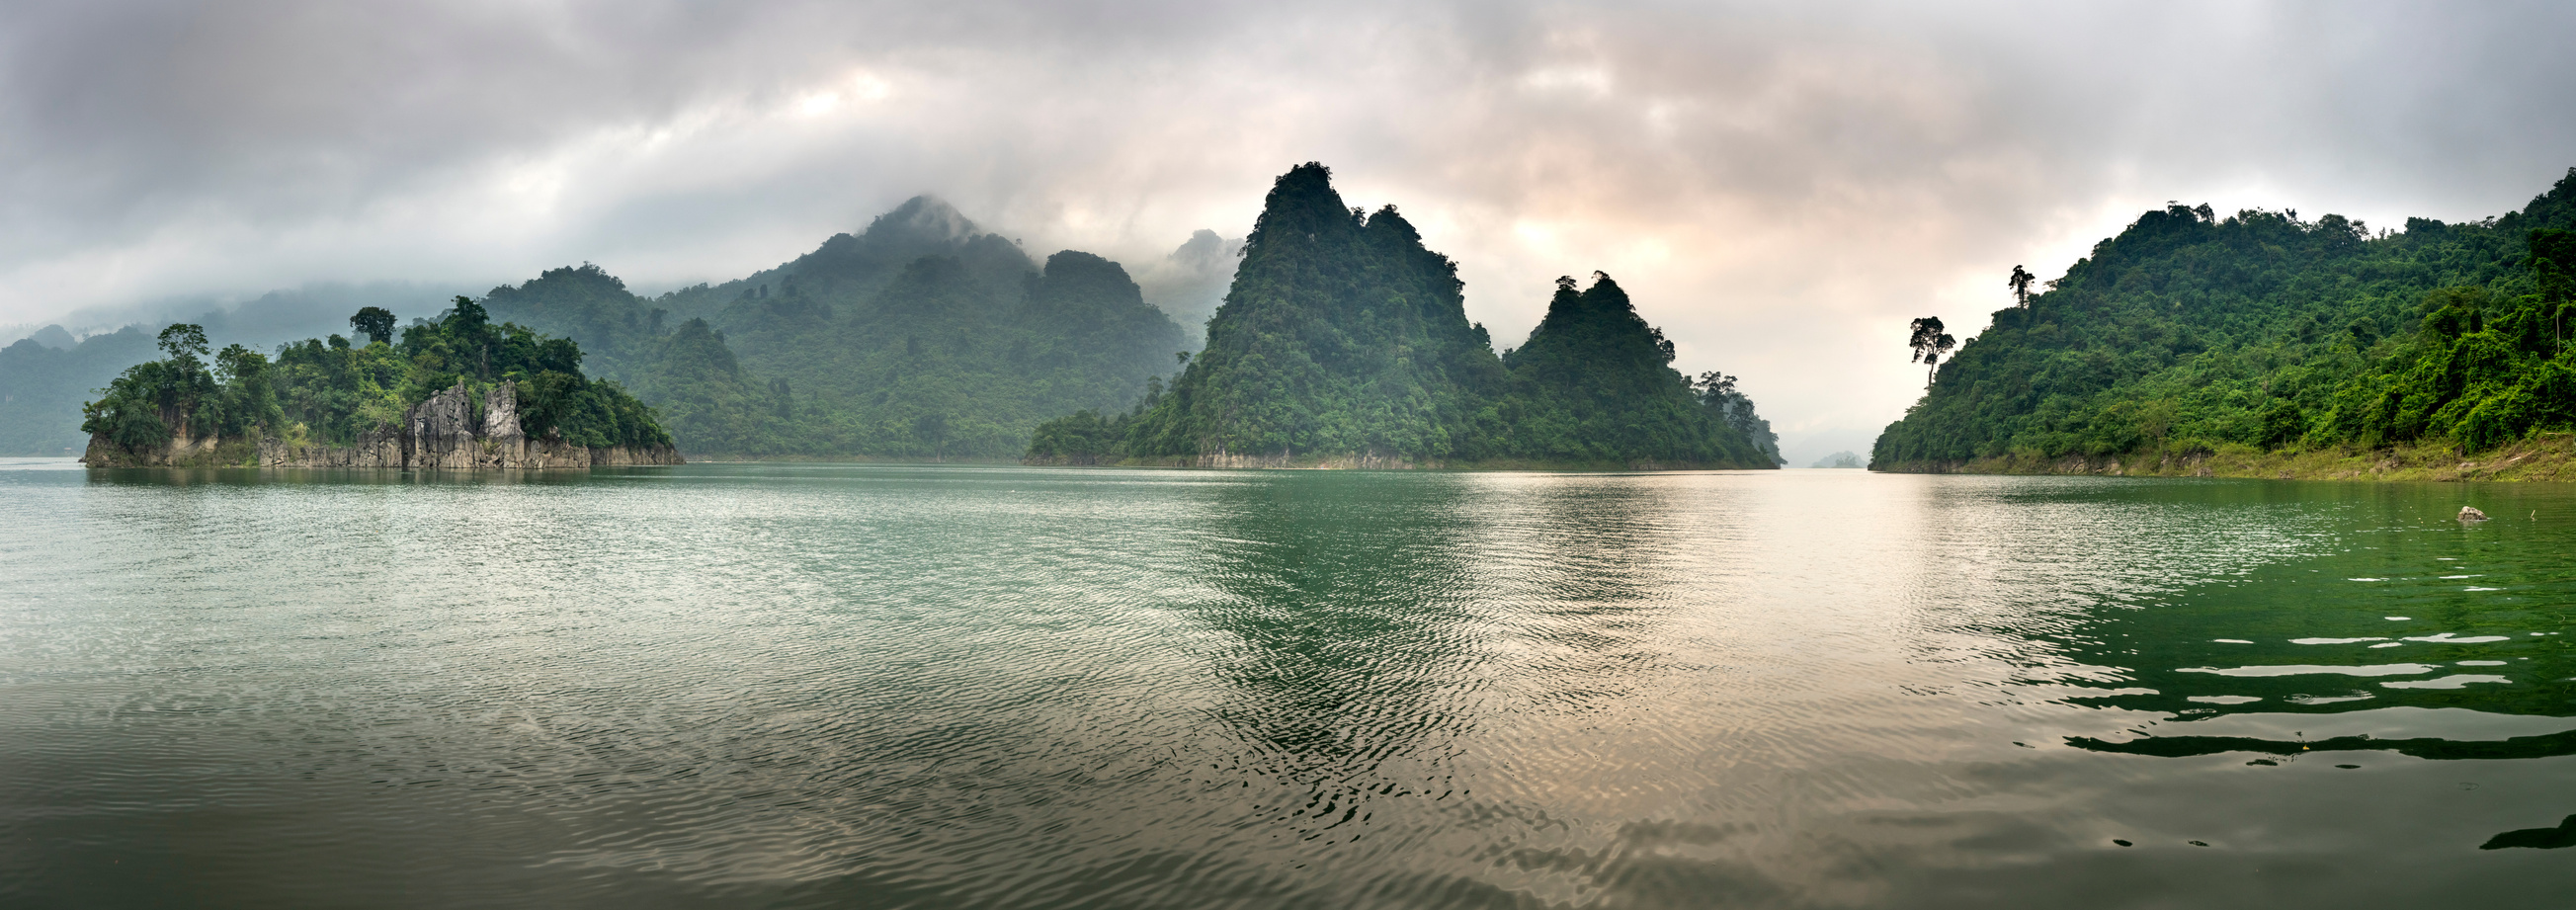 Rippling lake surrounded by hills covered with jungles